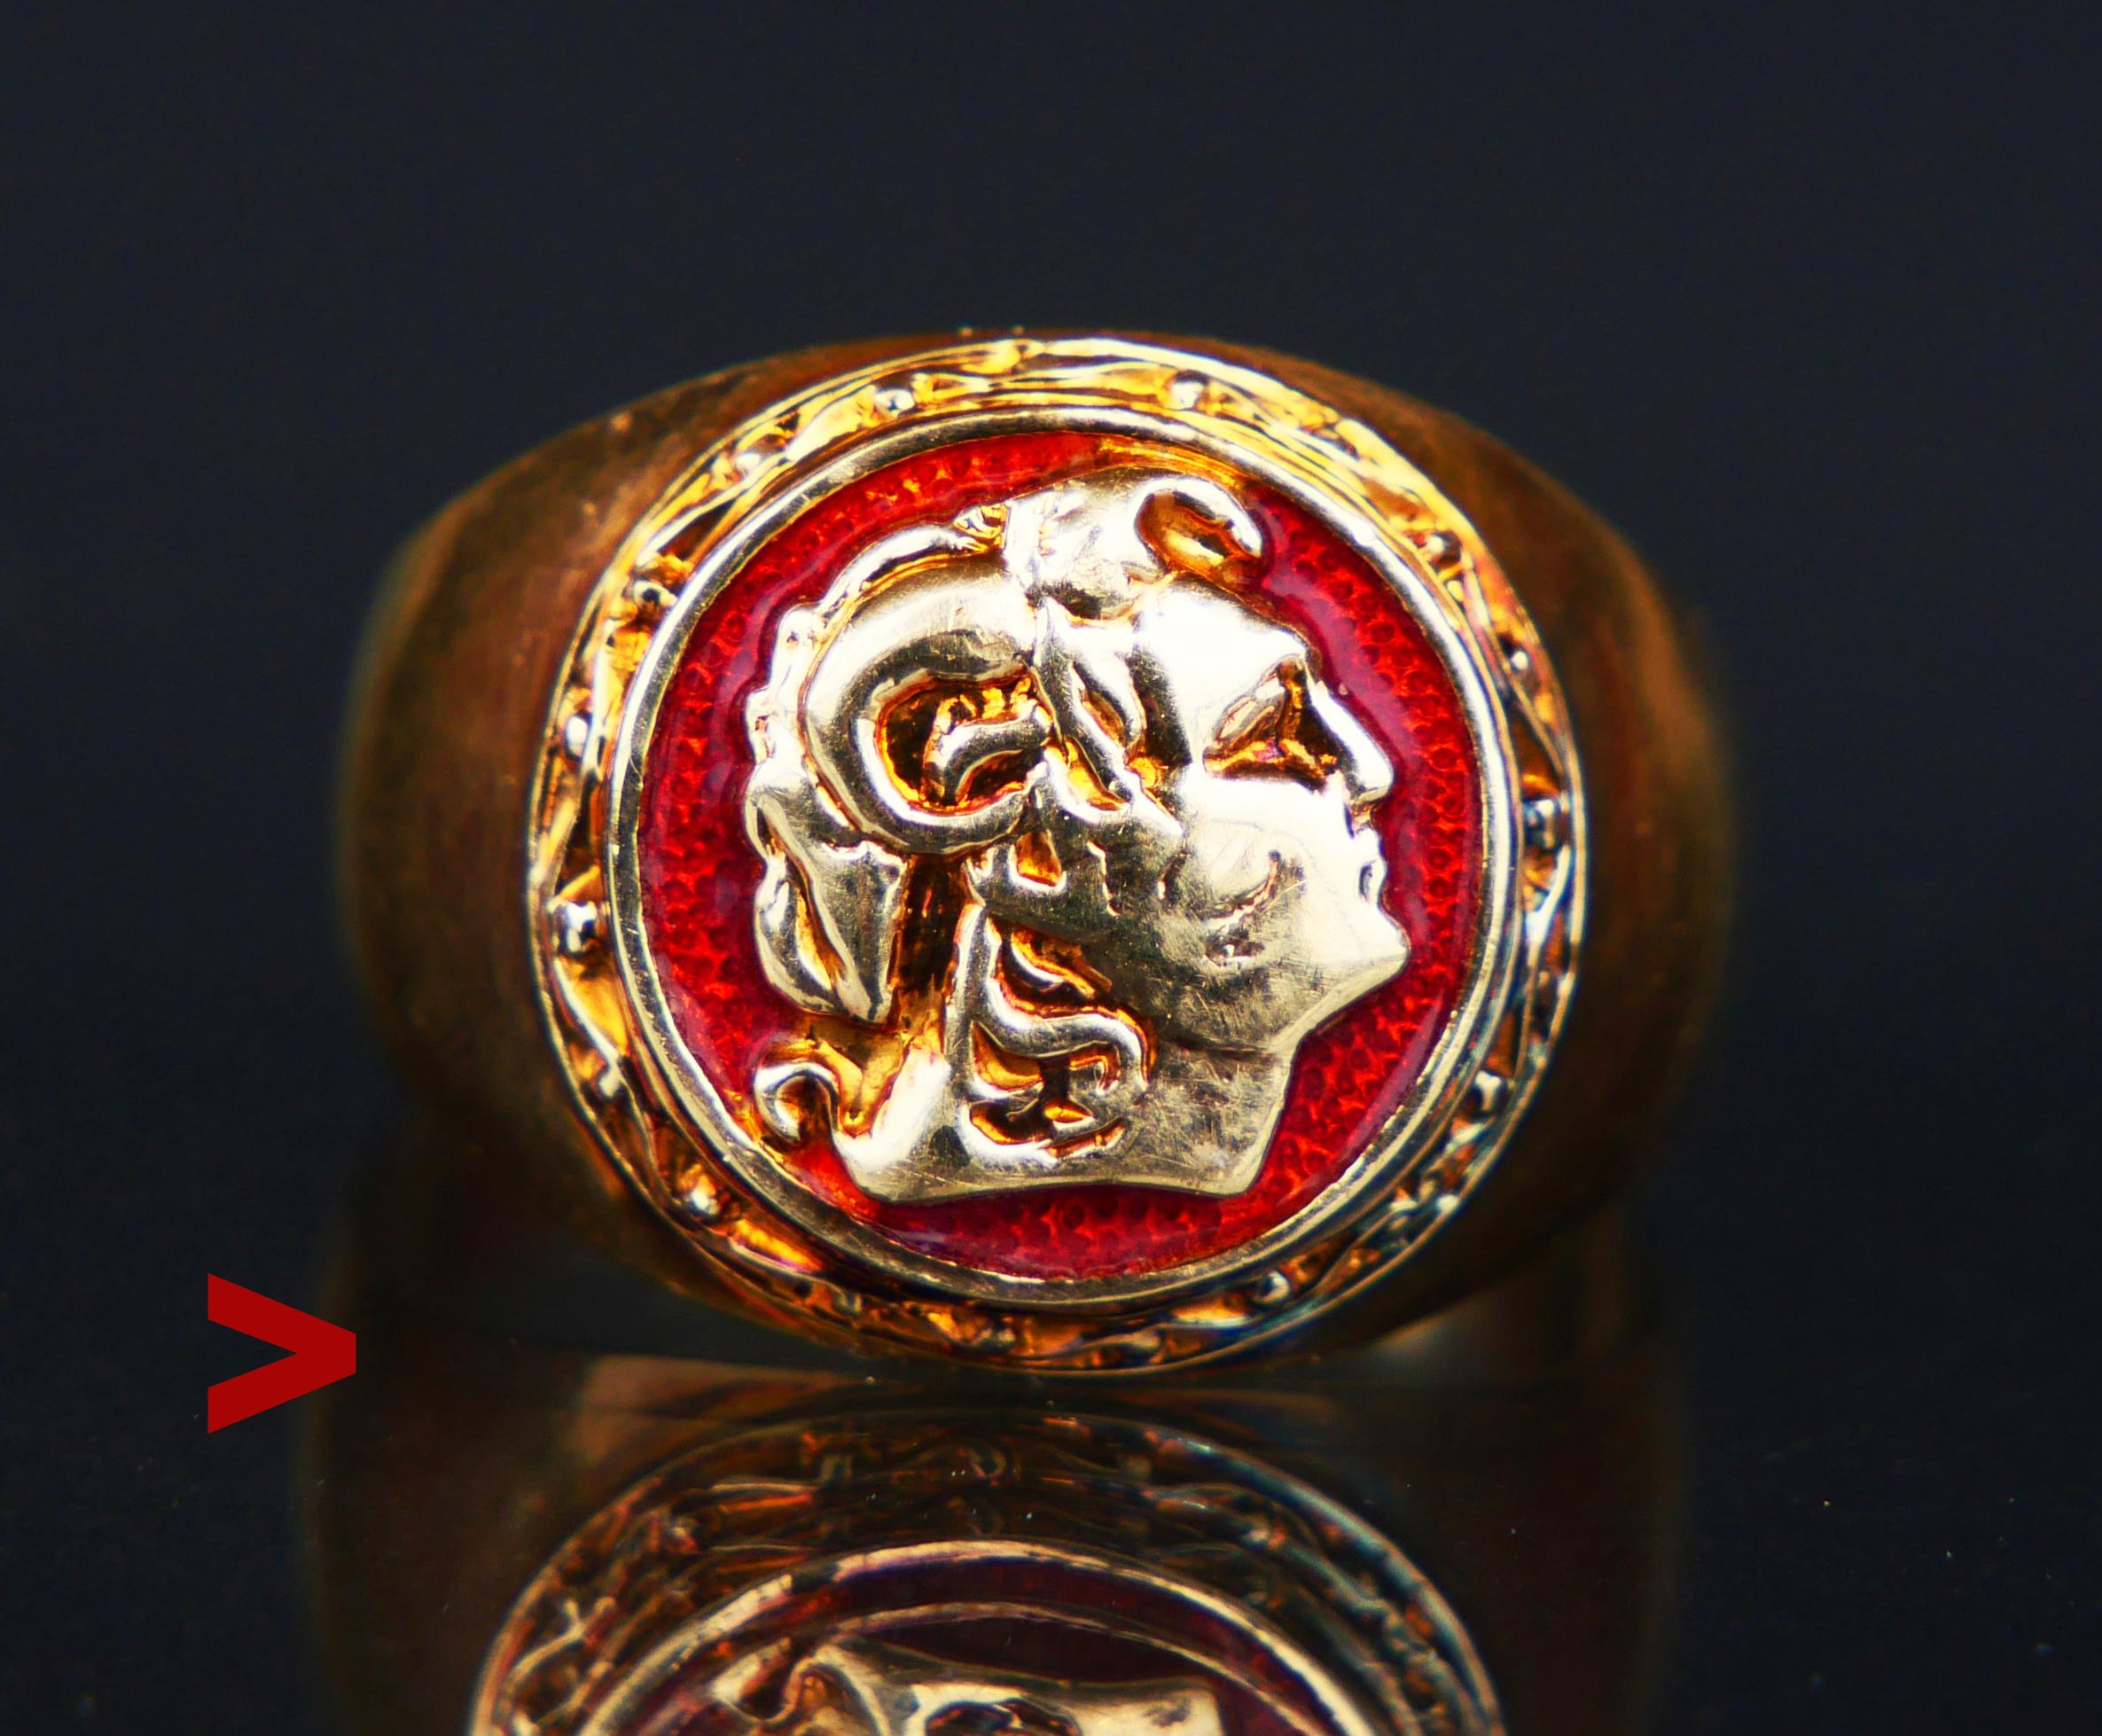 Great looking signet ring for Men in solid 14K Yellow Gold with profile of Alexander the Great on Red Enameled background.

Unknown origin. Band hallmarked 585 , band's metal tested solid 14K Yellow gold.

Crown is Ø 16 mm x 4 mm deep . Size : Ø